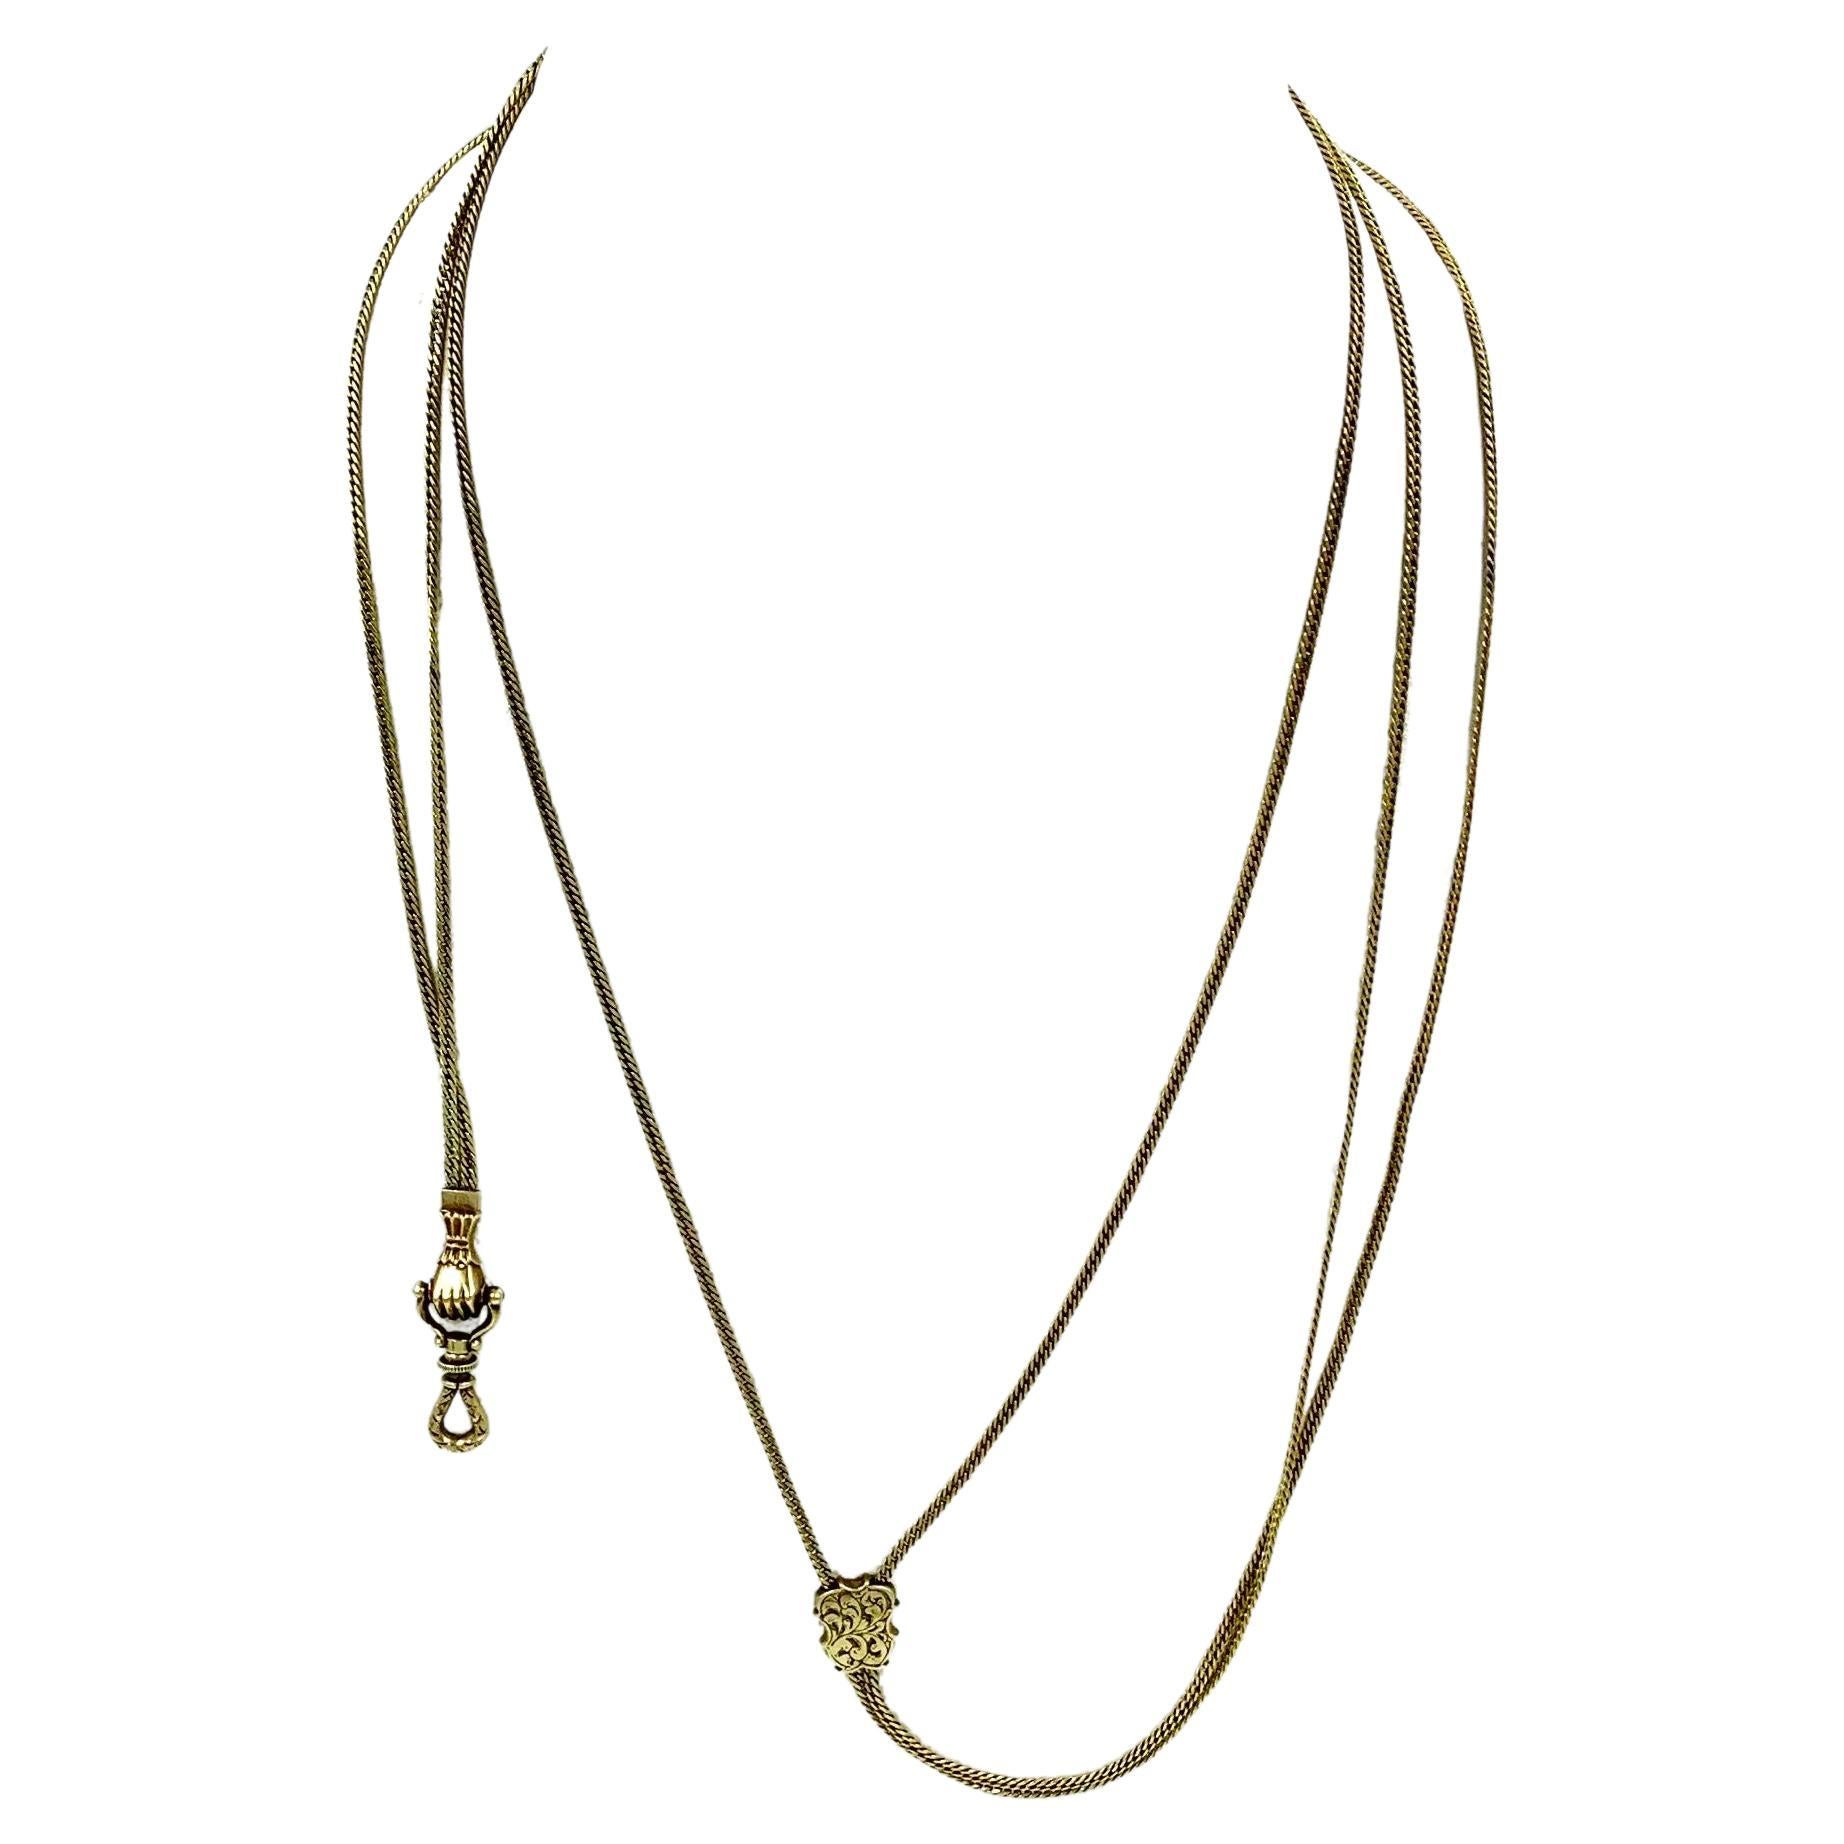 Exceptionally Long Antique 18K Gold Mano Sautoir Slide Chain Necklace Circa 1840 For Sale